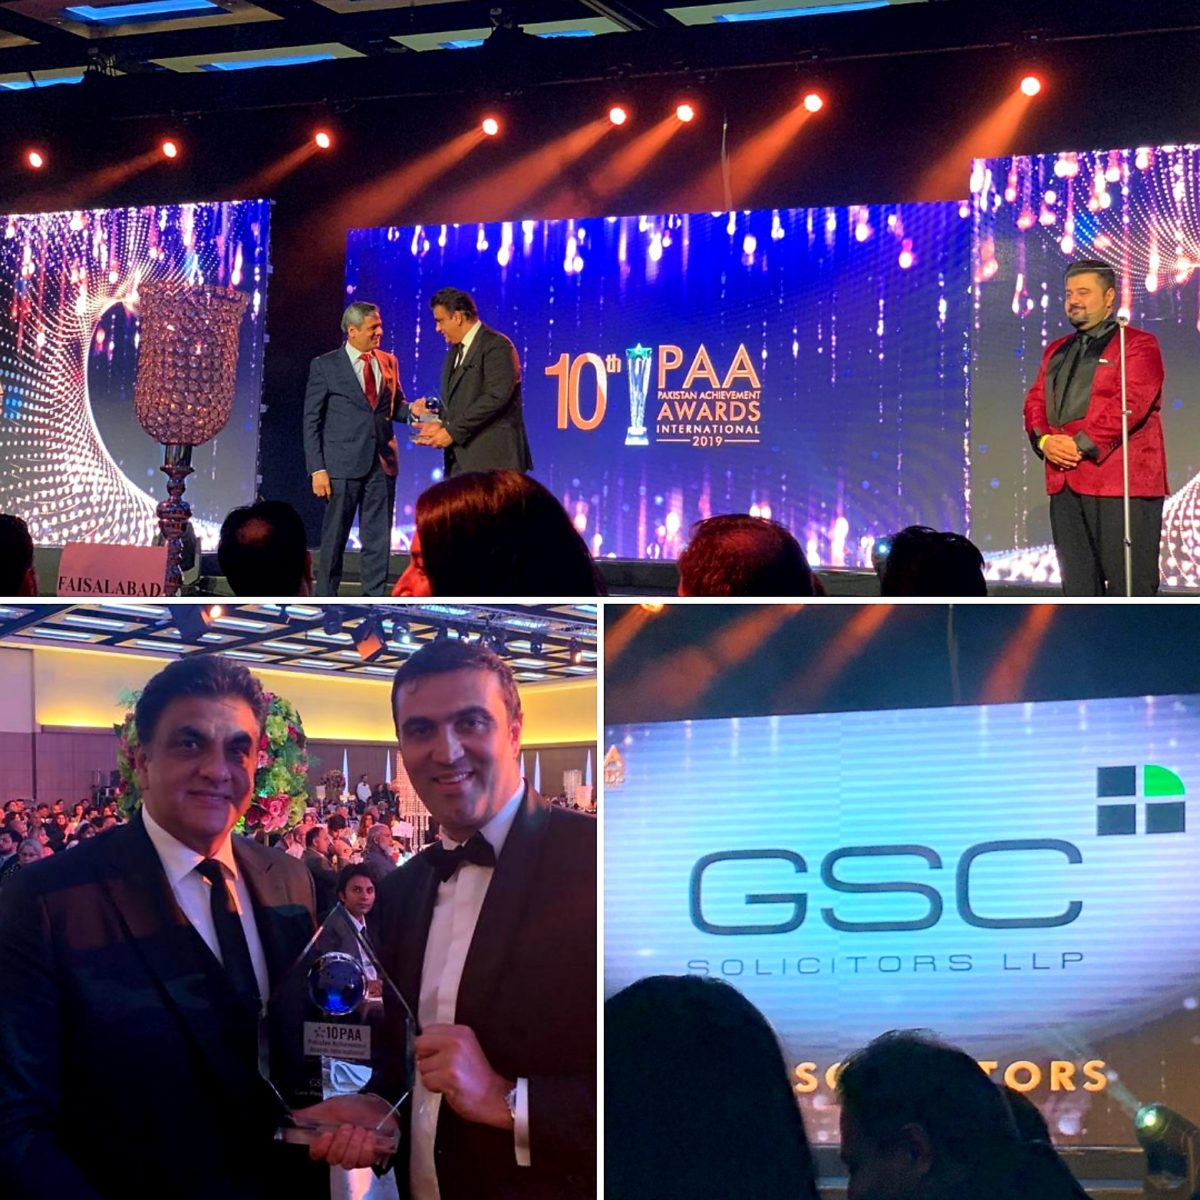 GSC Solicitors LLP Receives ‘The Law Firm of the Year 2019’ Award